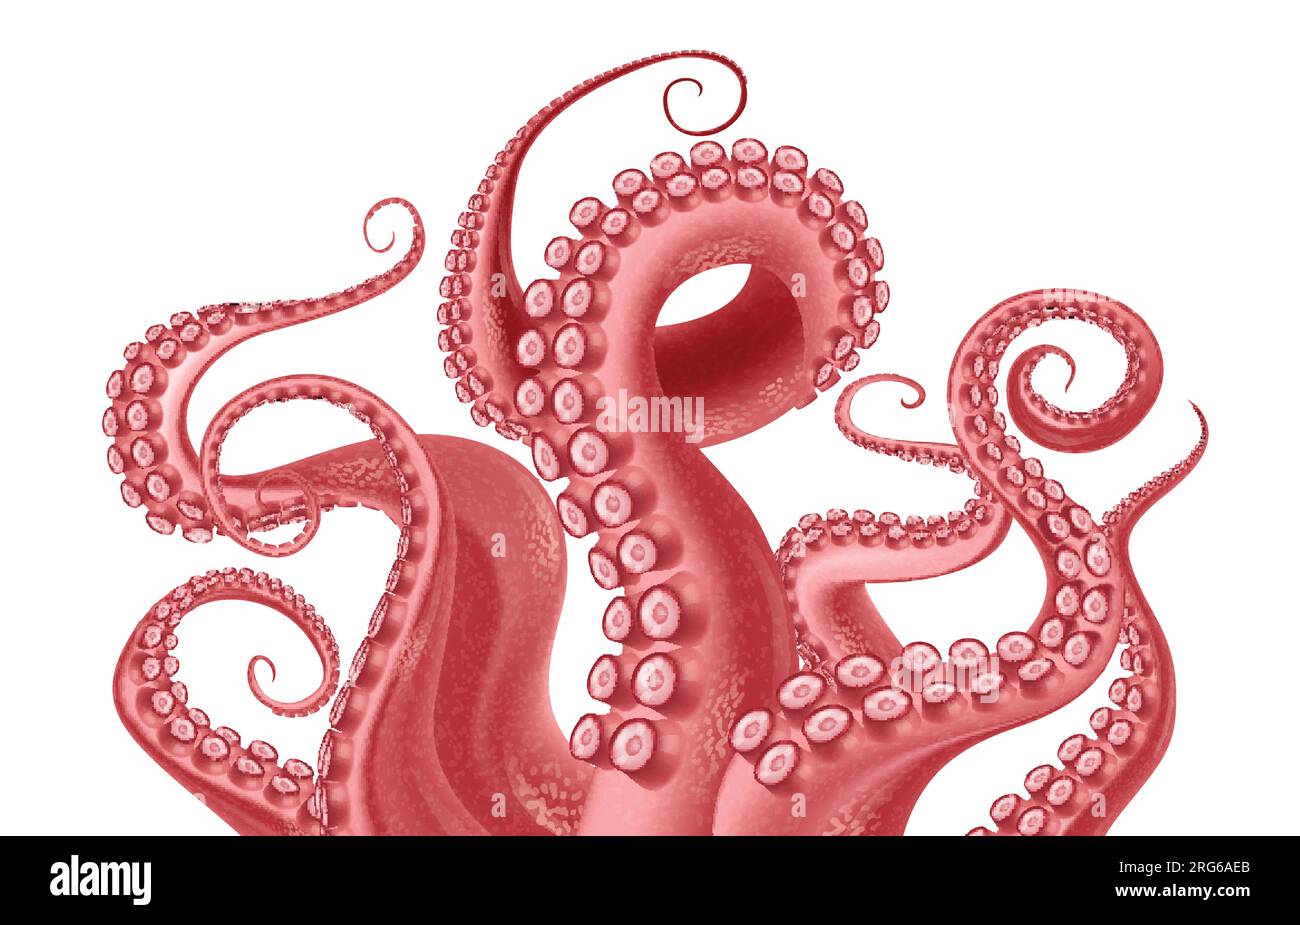 https://c8.alamy.com/comp/2RG6AEB/abstract-fragment-of-red-octopus-with-writhing-tentacles-with-suckers-at-white-background-realistic-vector-illustration-2RG6AEB.jpg